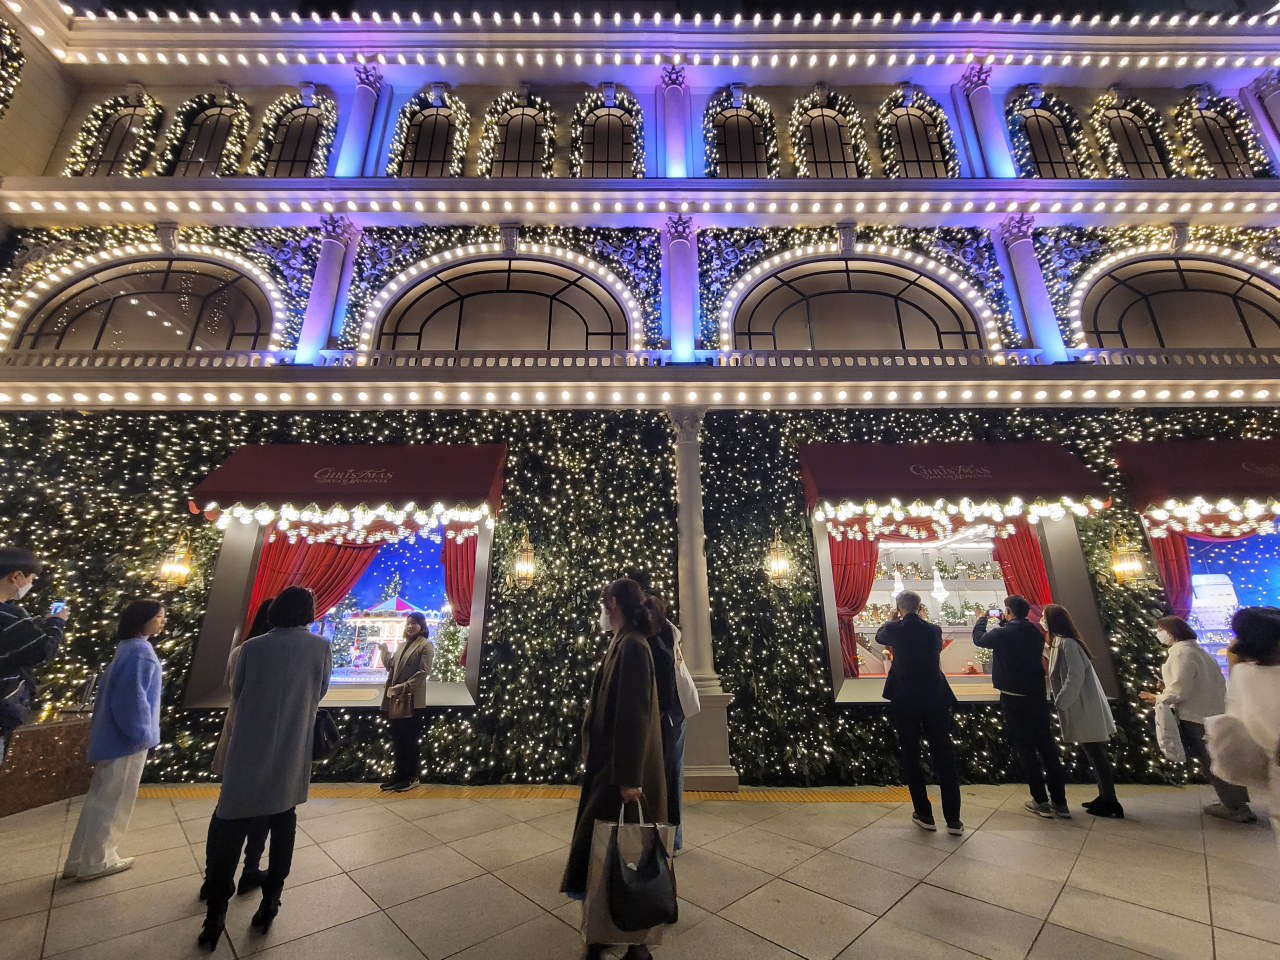 Lotte Department Store displays Christmas lights with the theme 